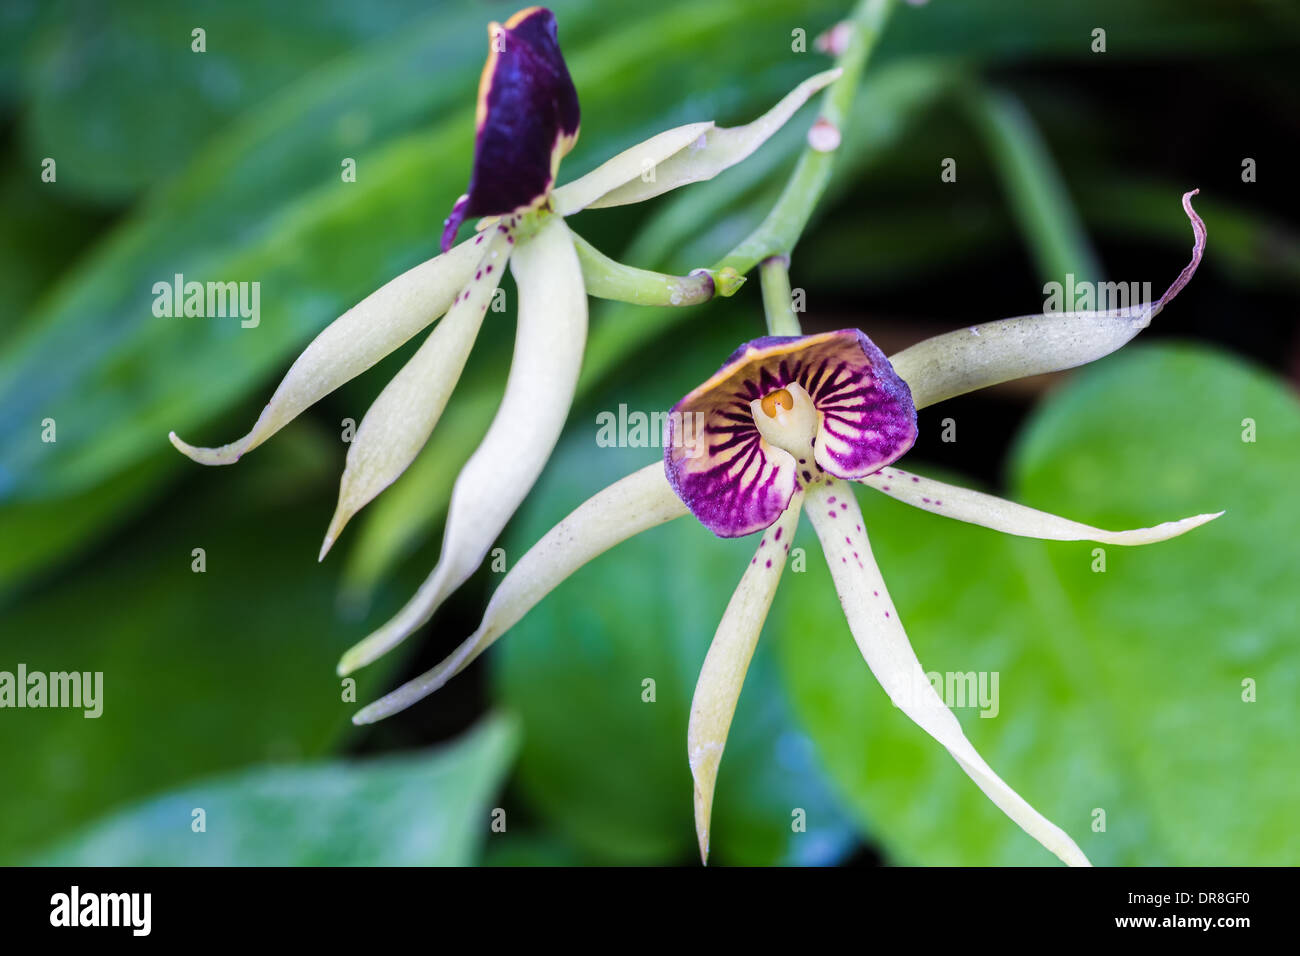 Two encyclia Green Hornet orchids on the vine Stock Photo